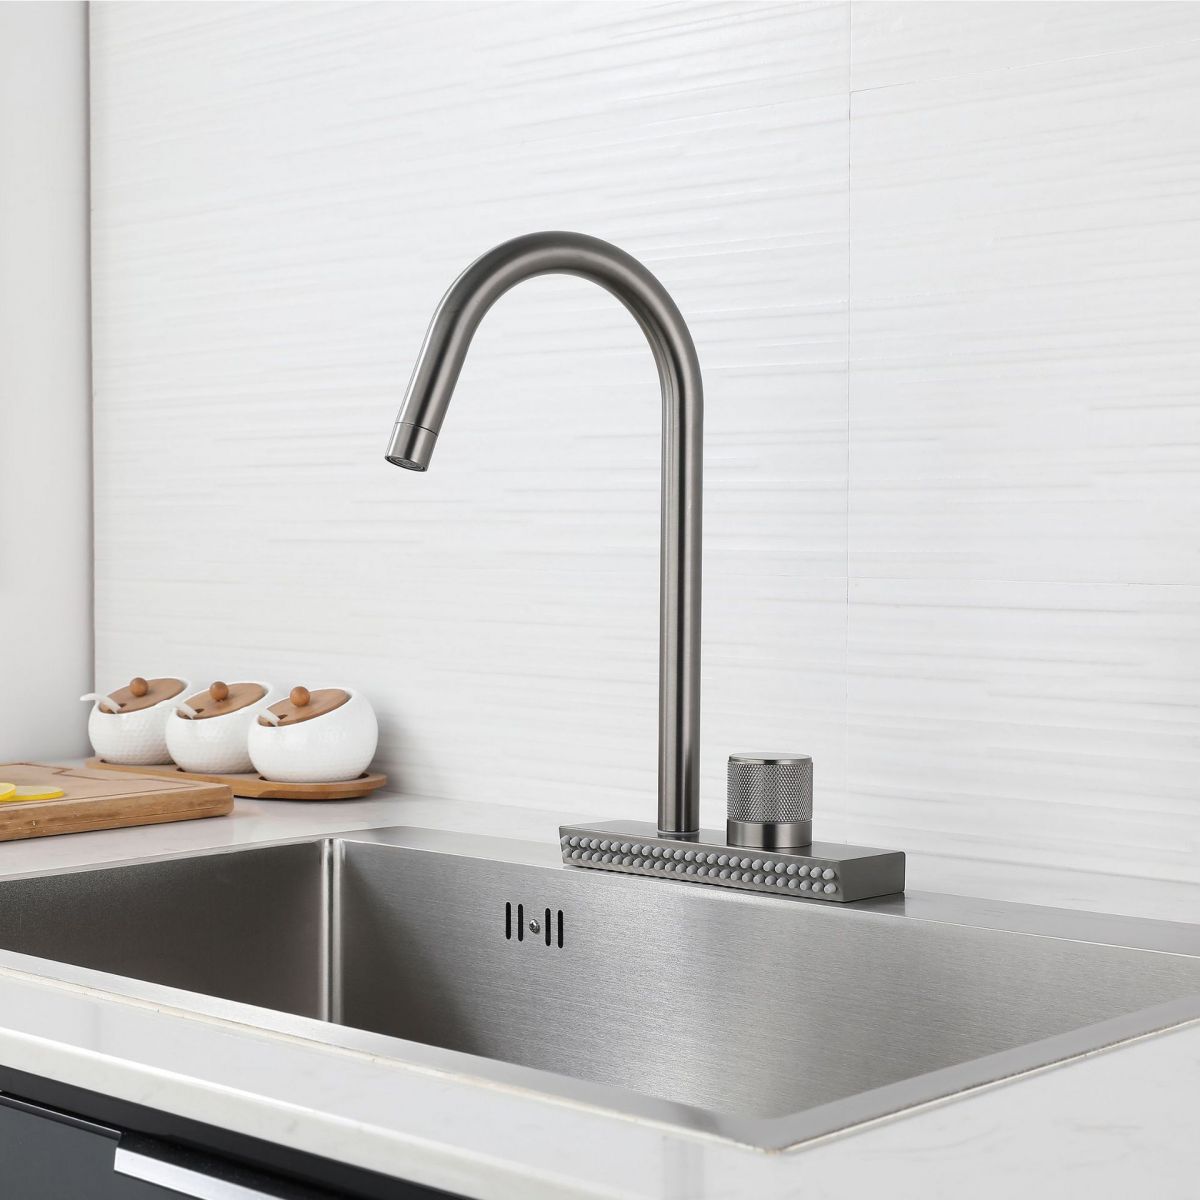 Contemporary Standard Kitchen Faucets Brushed Nickel No Sensor Swivel Spout